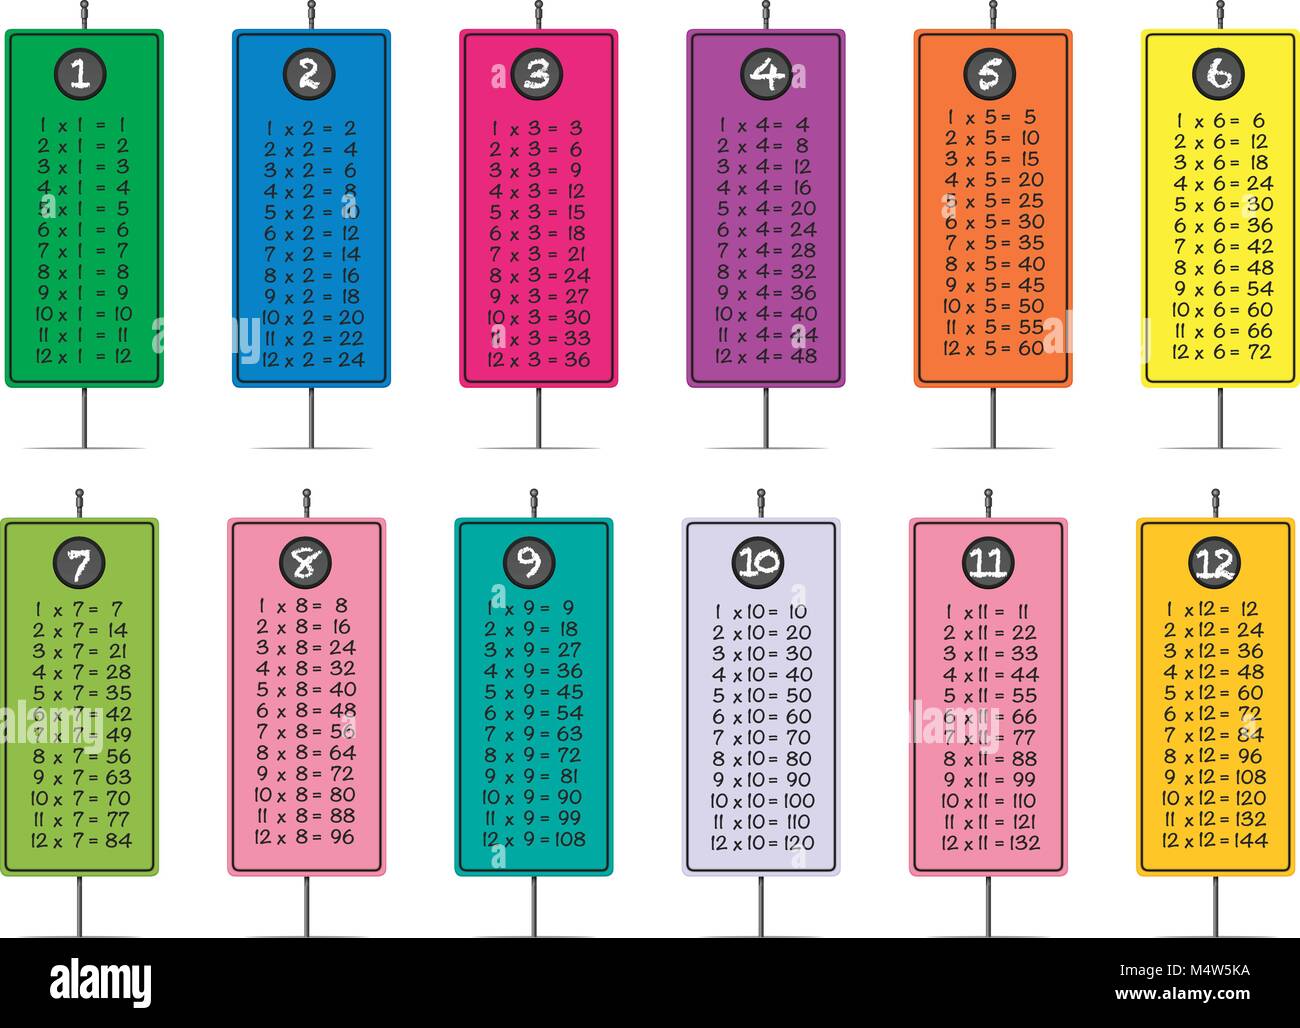 Multiplication tables template in different colors illustration Stock Vector